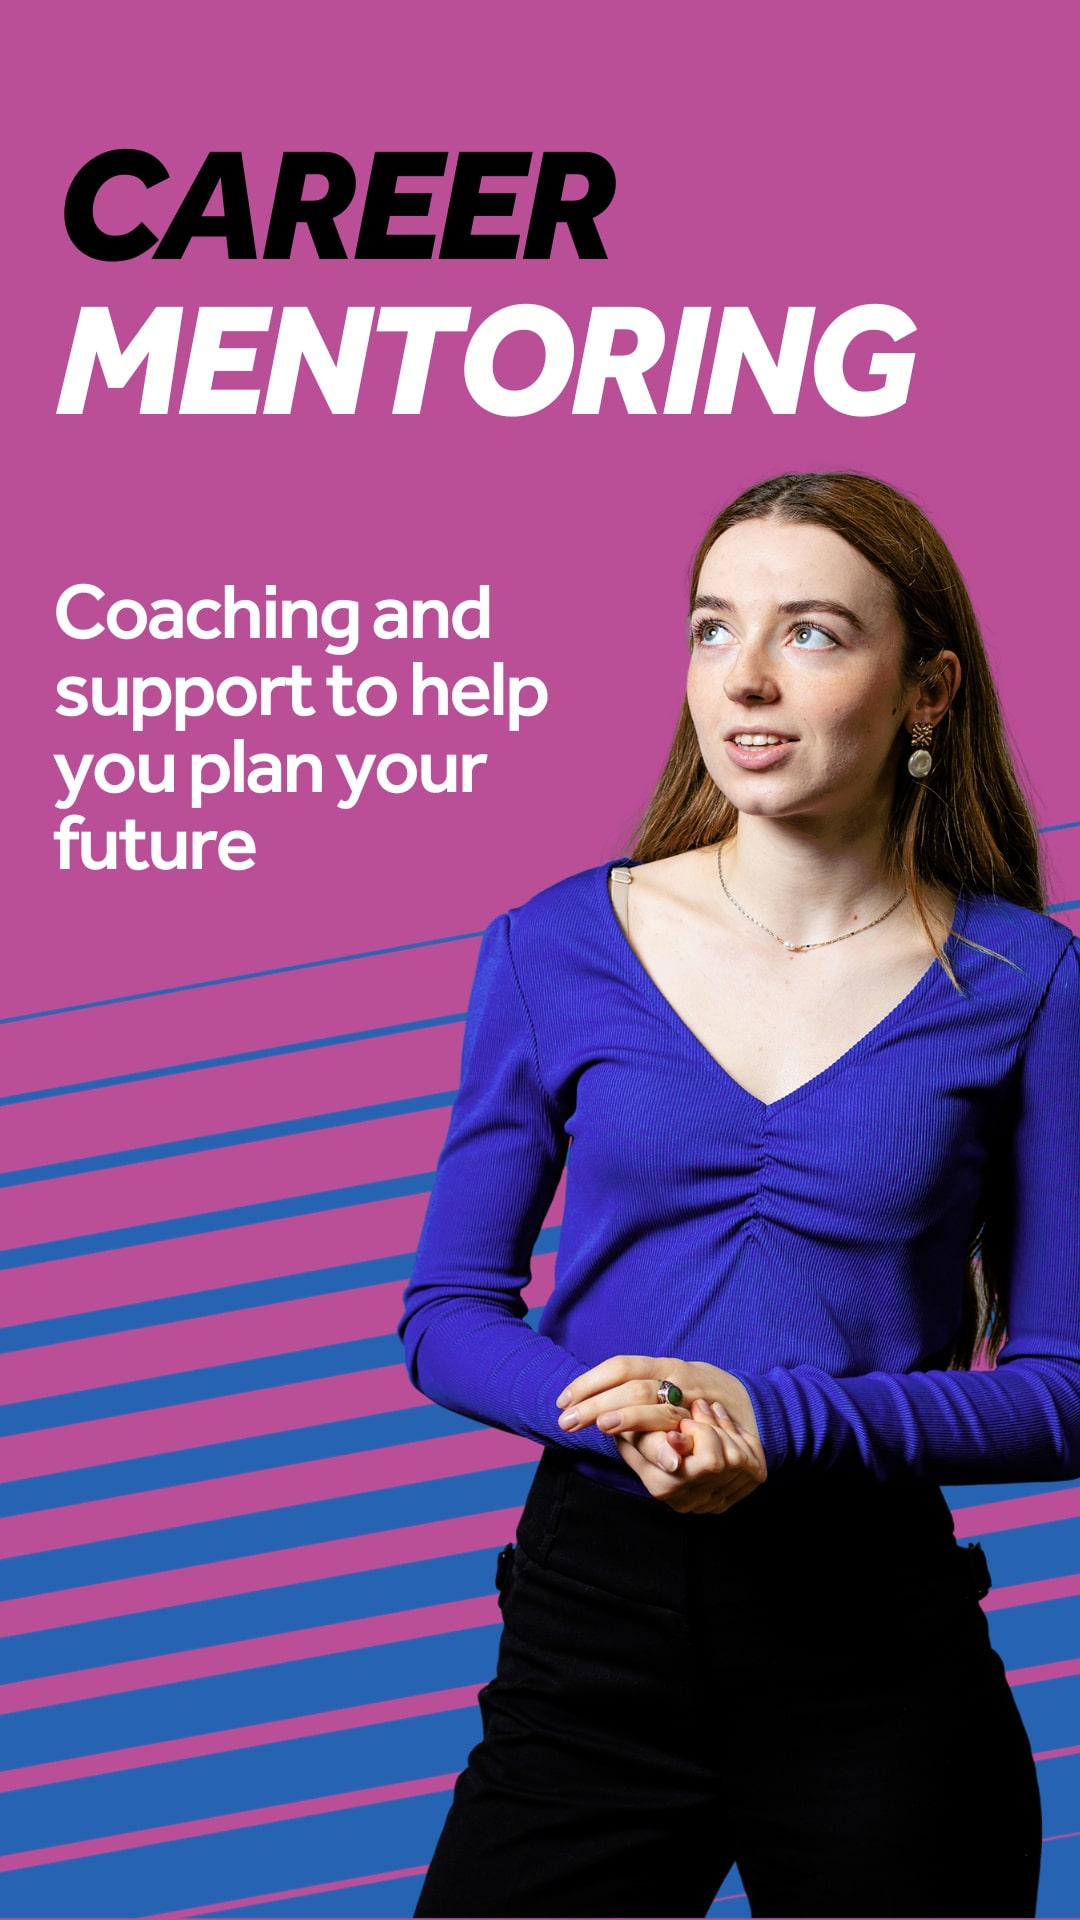 Text reads "Career Mentoring: Coaching and support to help plan your future". A woman looks to the top left. Light purple and blue background.